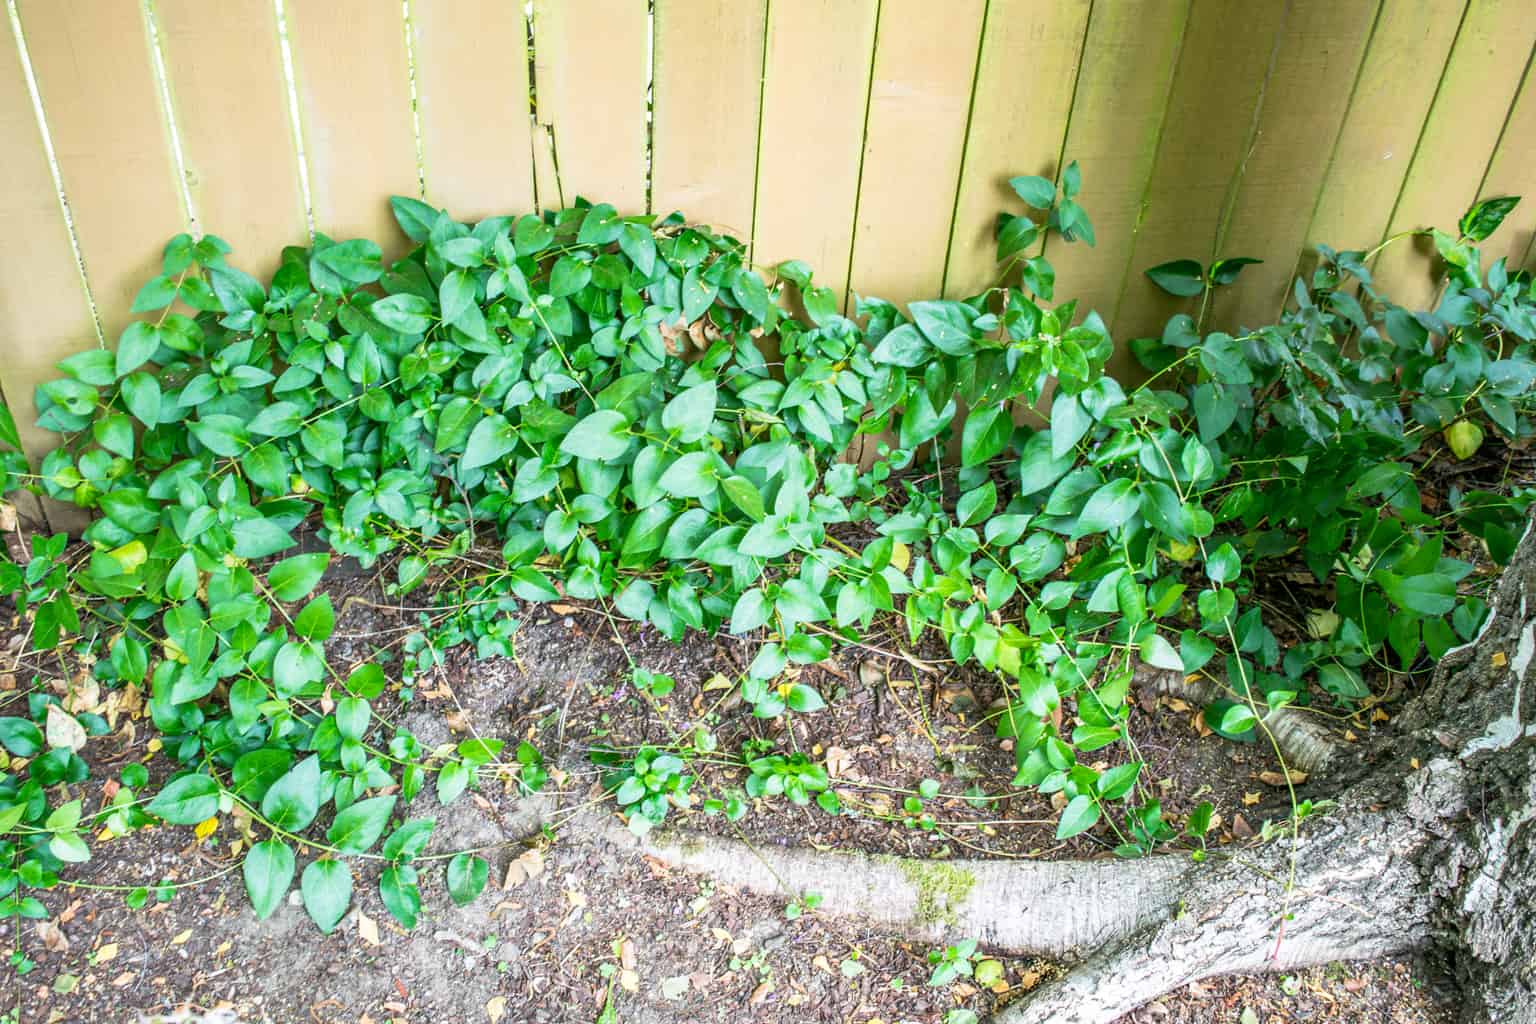 clematis vines in pile on ground